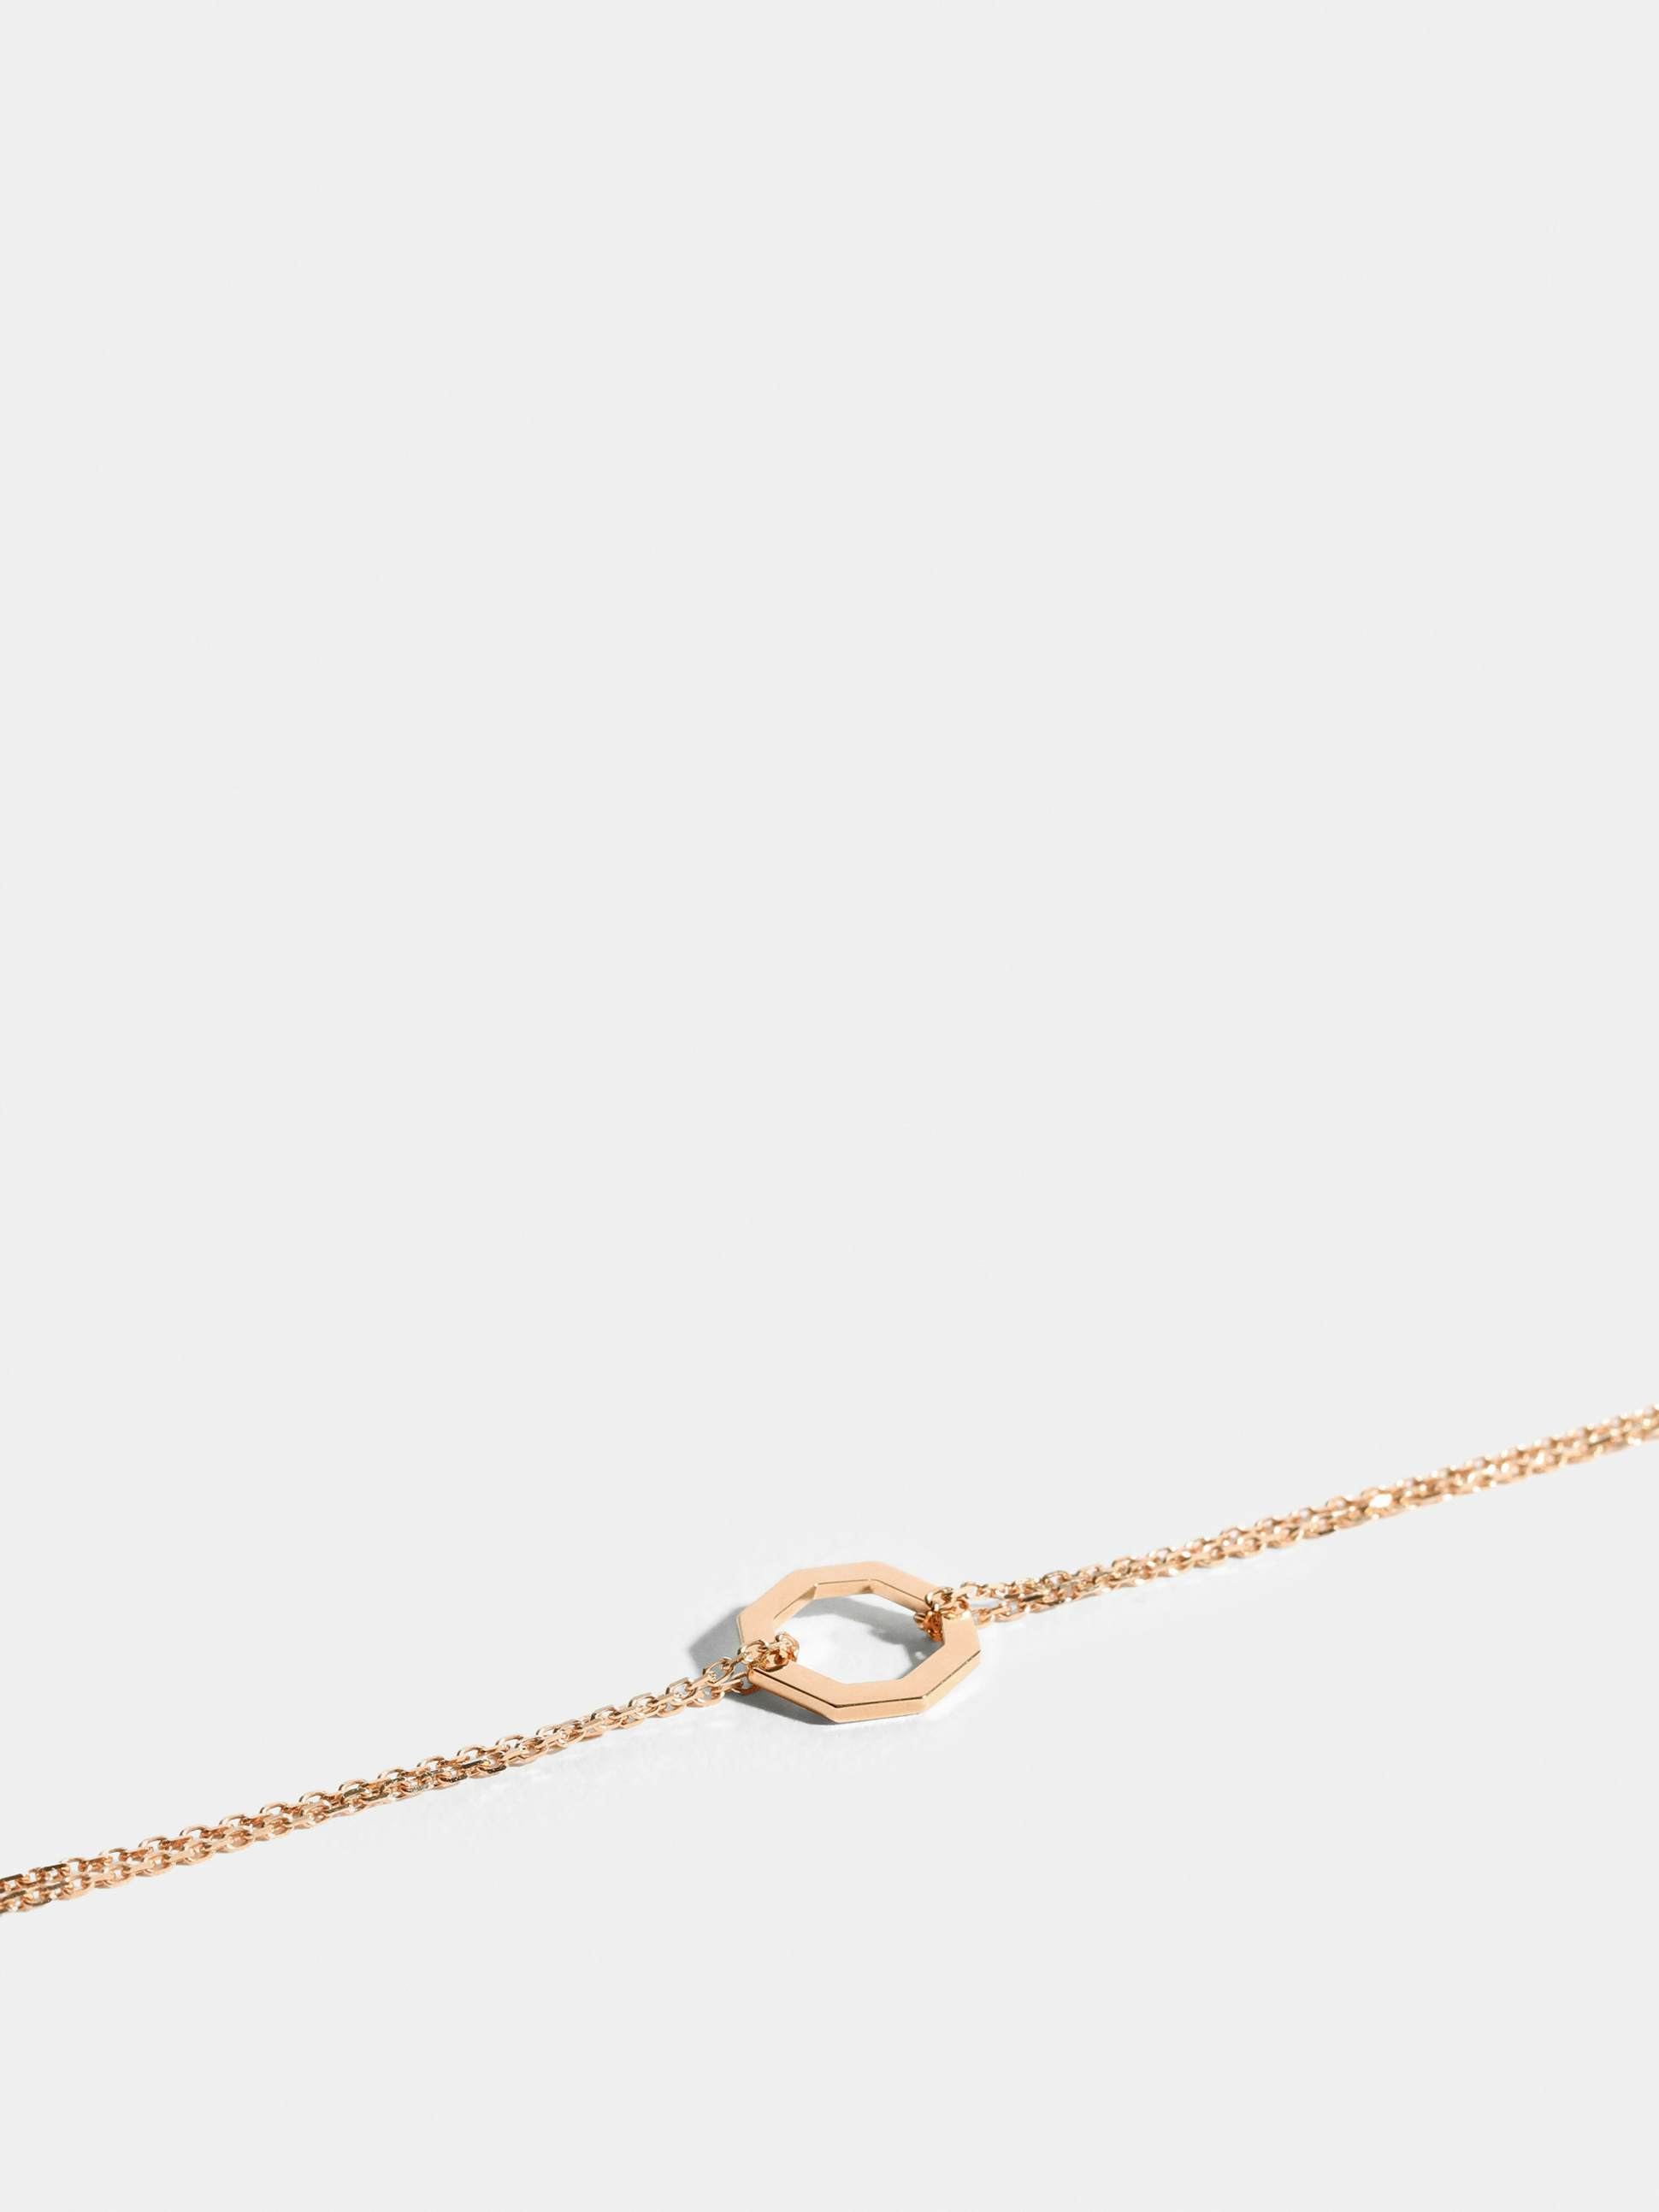 Octogone motif in 18k Fairmined ethical rose gold, on a chain.